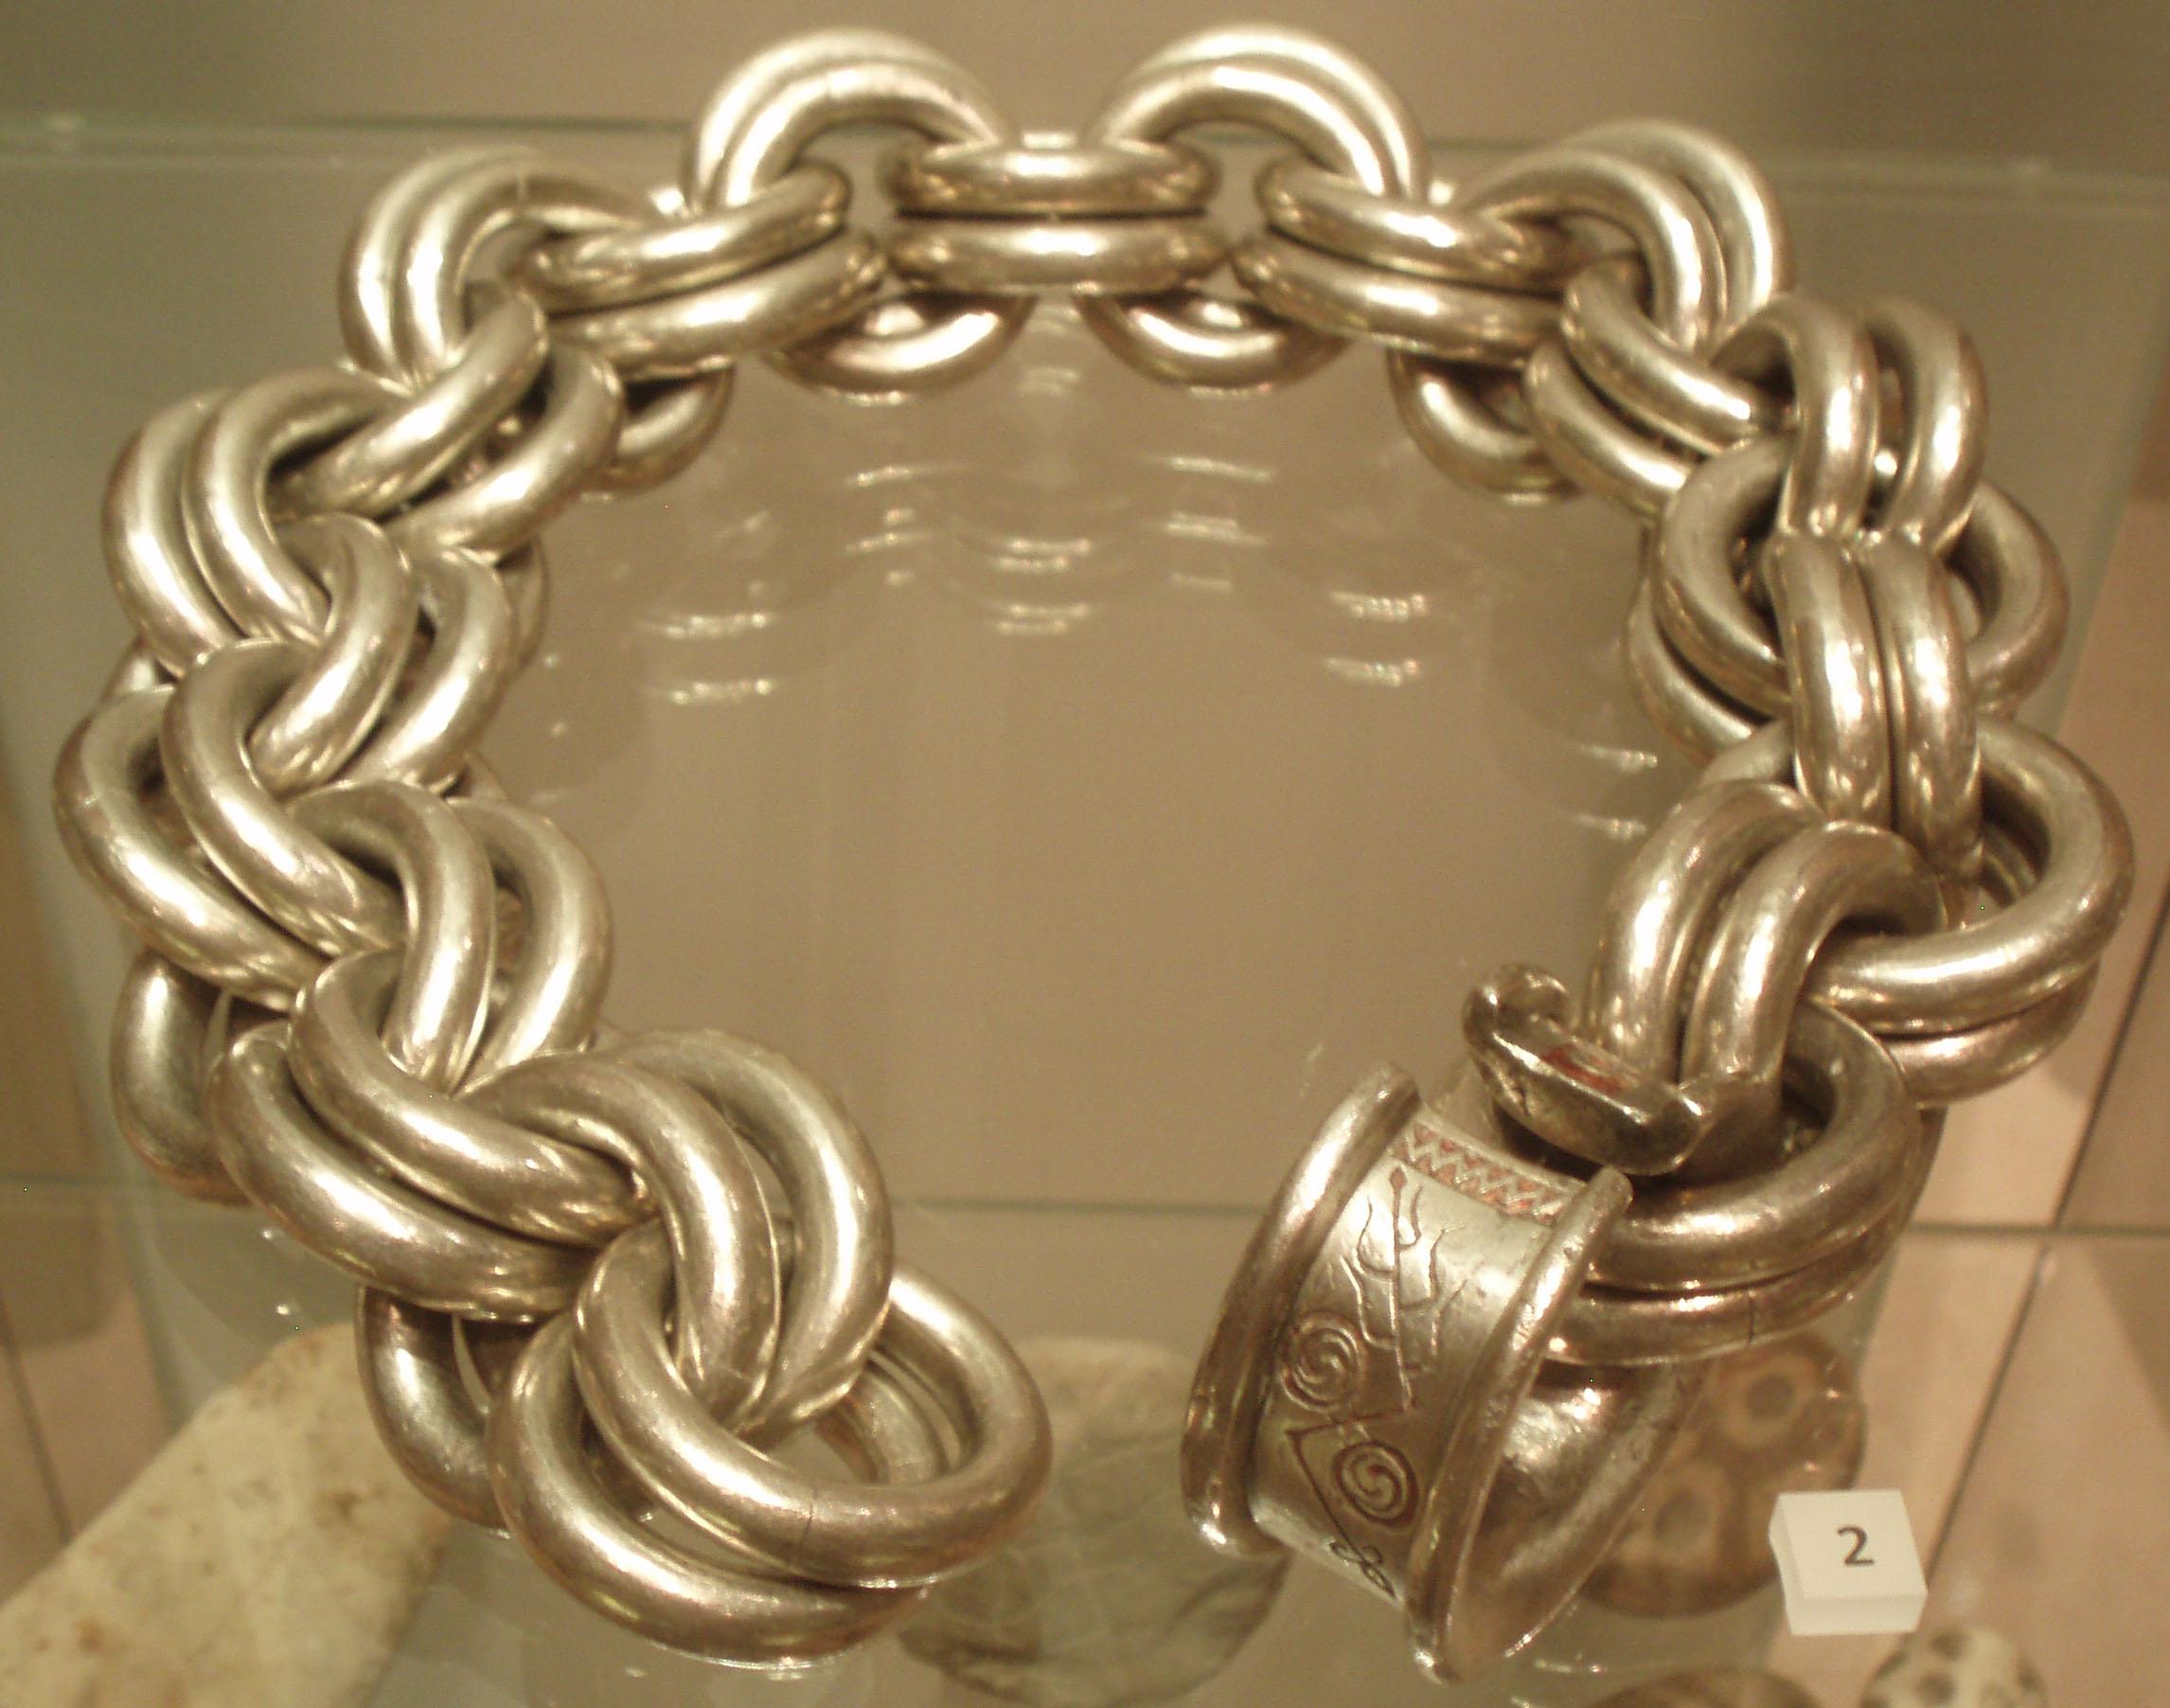 The Whitecleuch Chain is a large Pictish silver chain found in Whitecleuch, Scotland in 1869. Likely a choker neck ornament. 400-800 CE, now on display at the Museum of Scotland.jpg